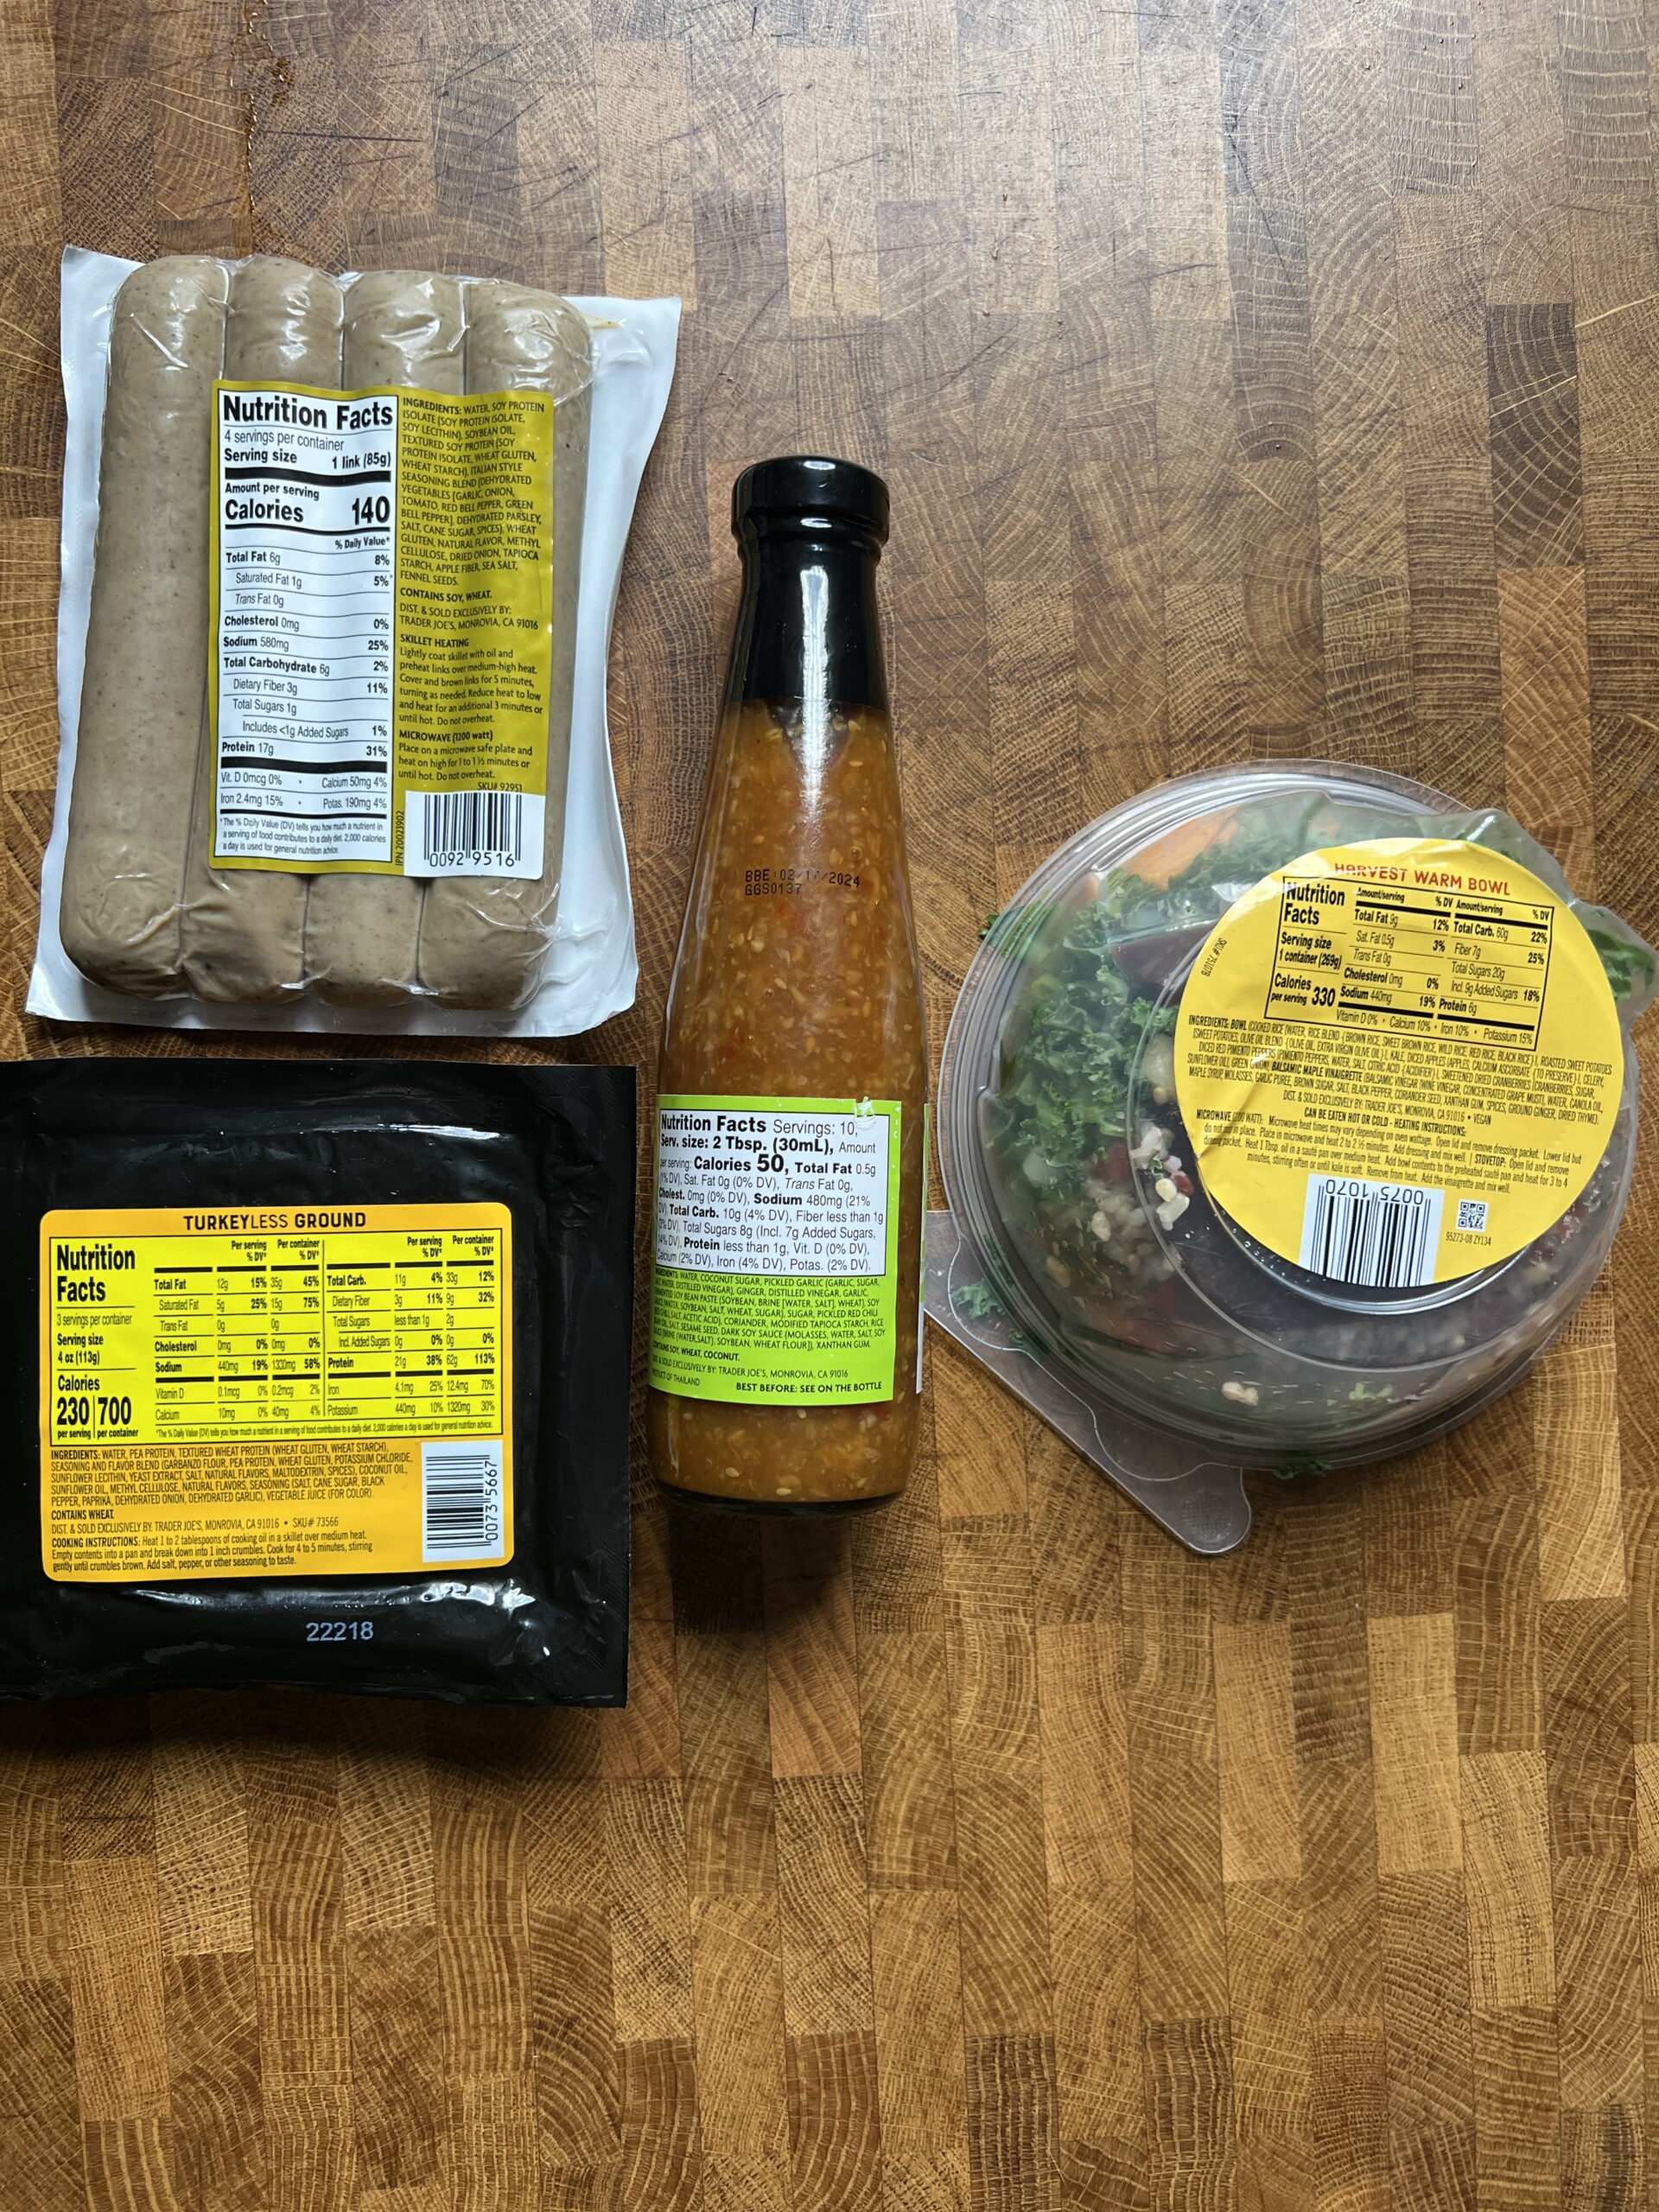 assortment of new vegan meal items at trader joes fall 2022 with nutrition facts.